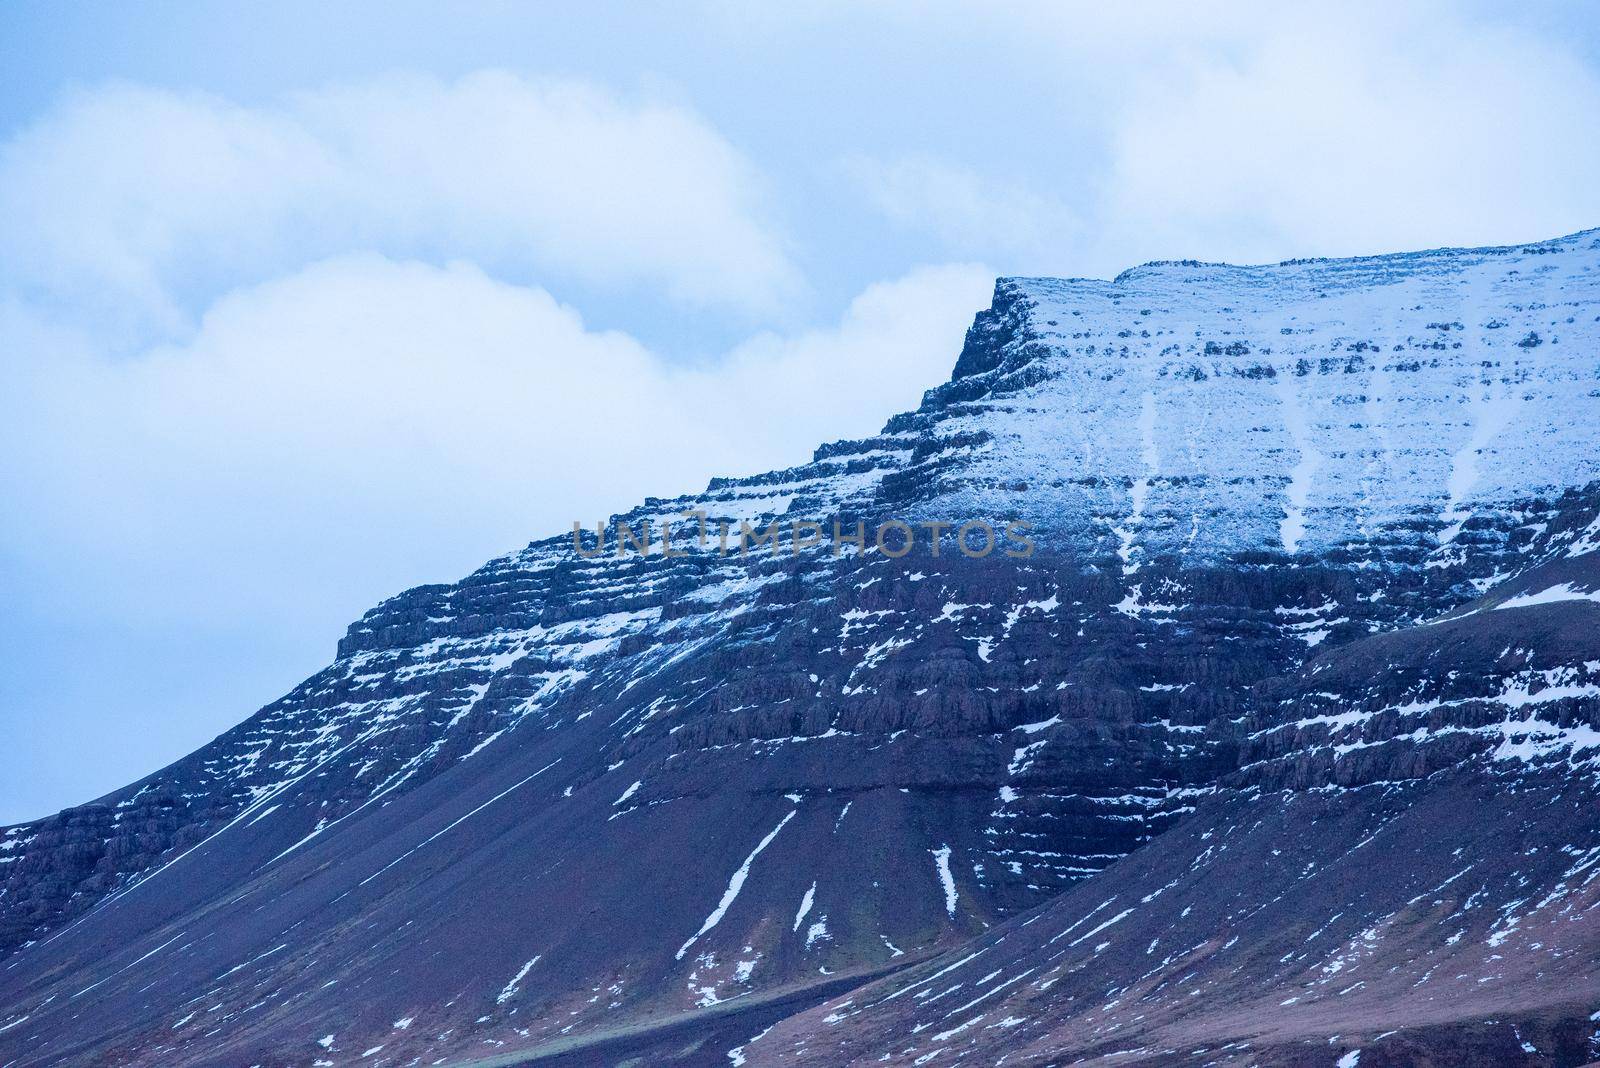 Close up of snow capped black mountain ridges in Iceland with clouds to add depth.